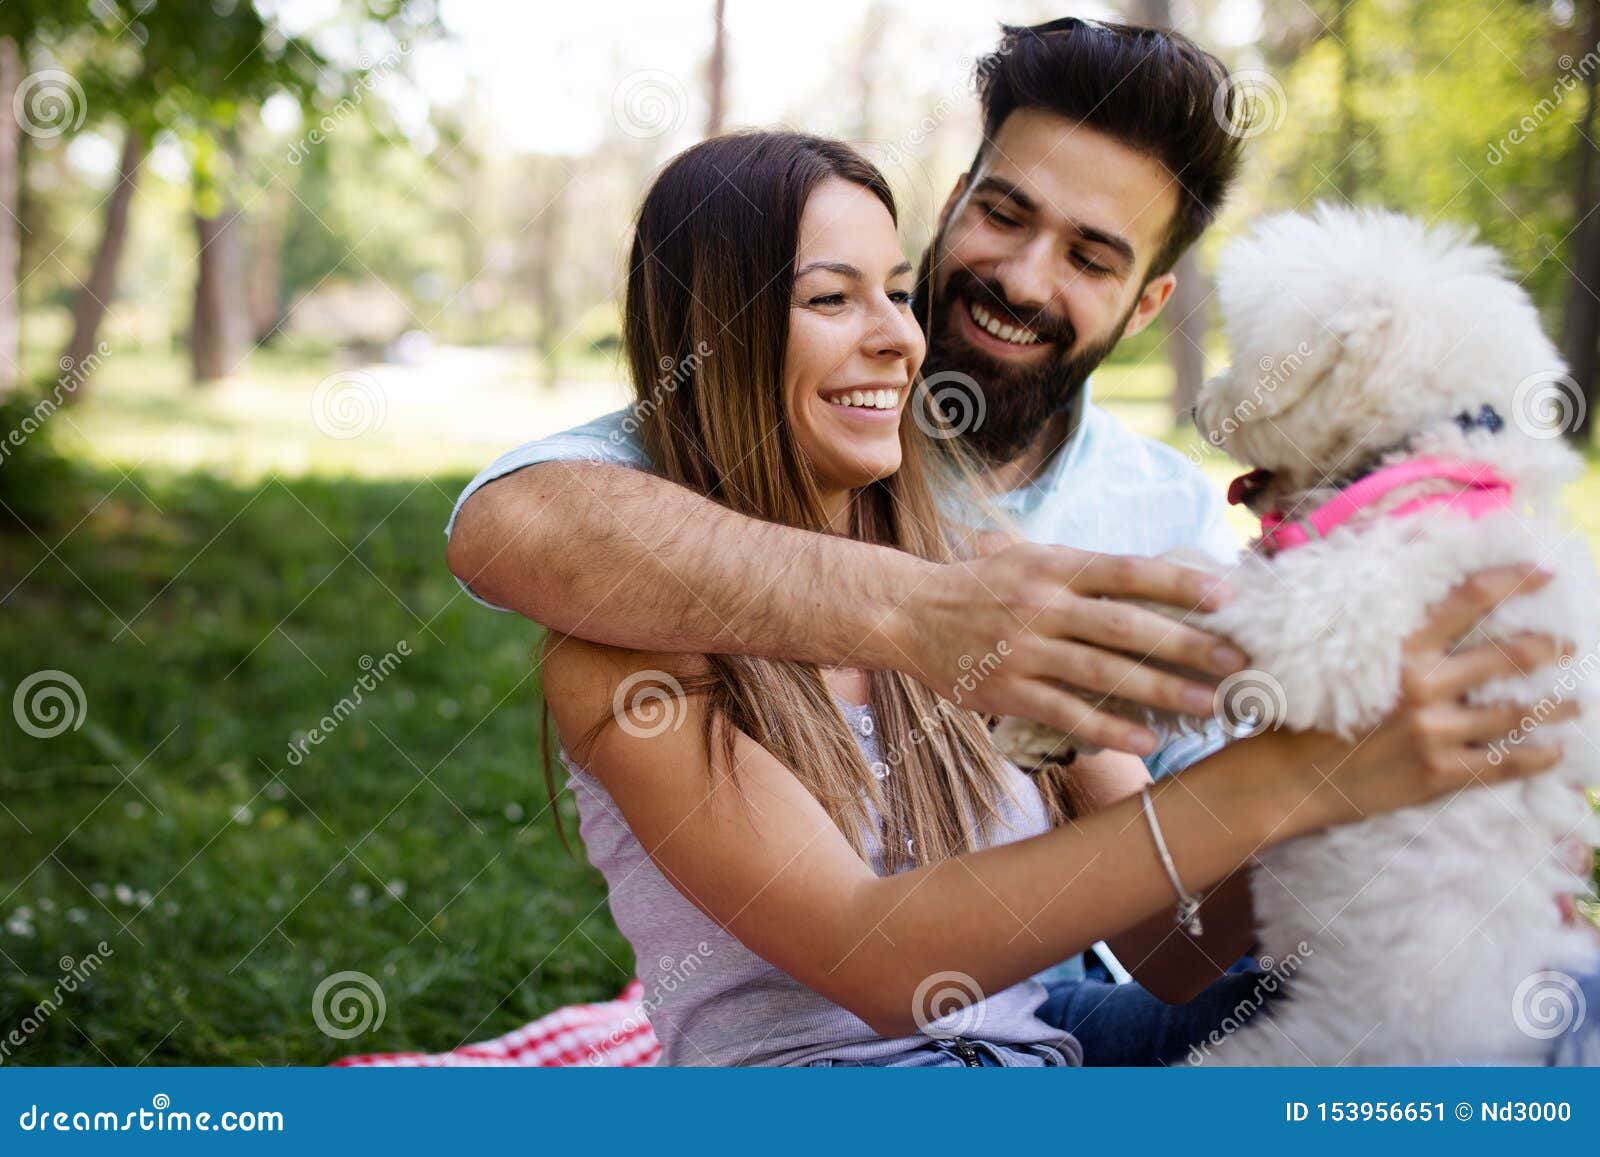 Lifestyle Happy Couple Resting At A Picnic In The Park With A Dog